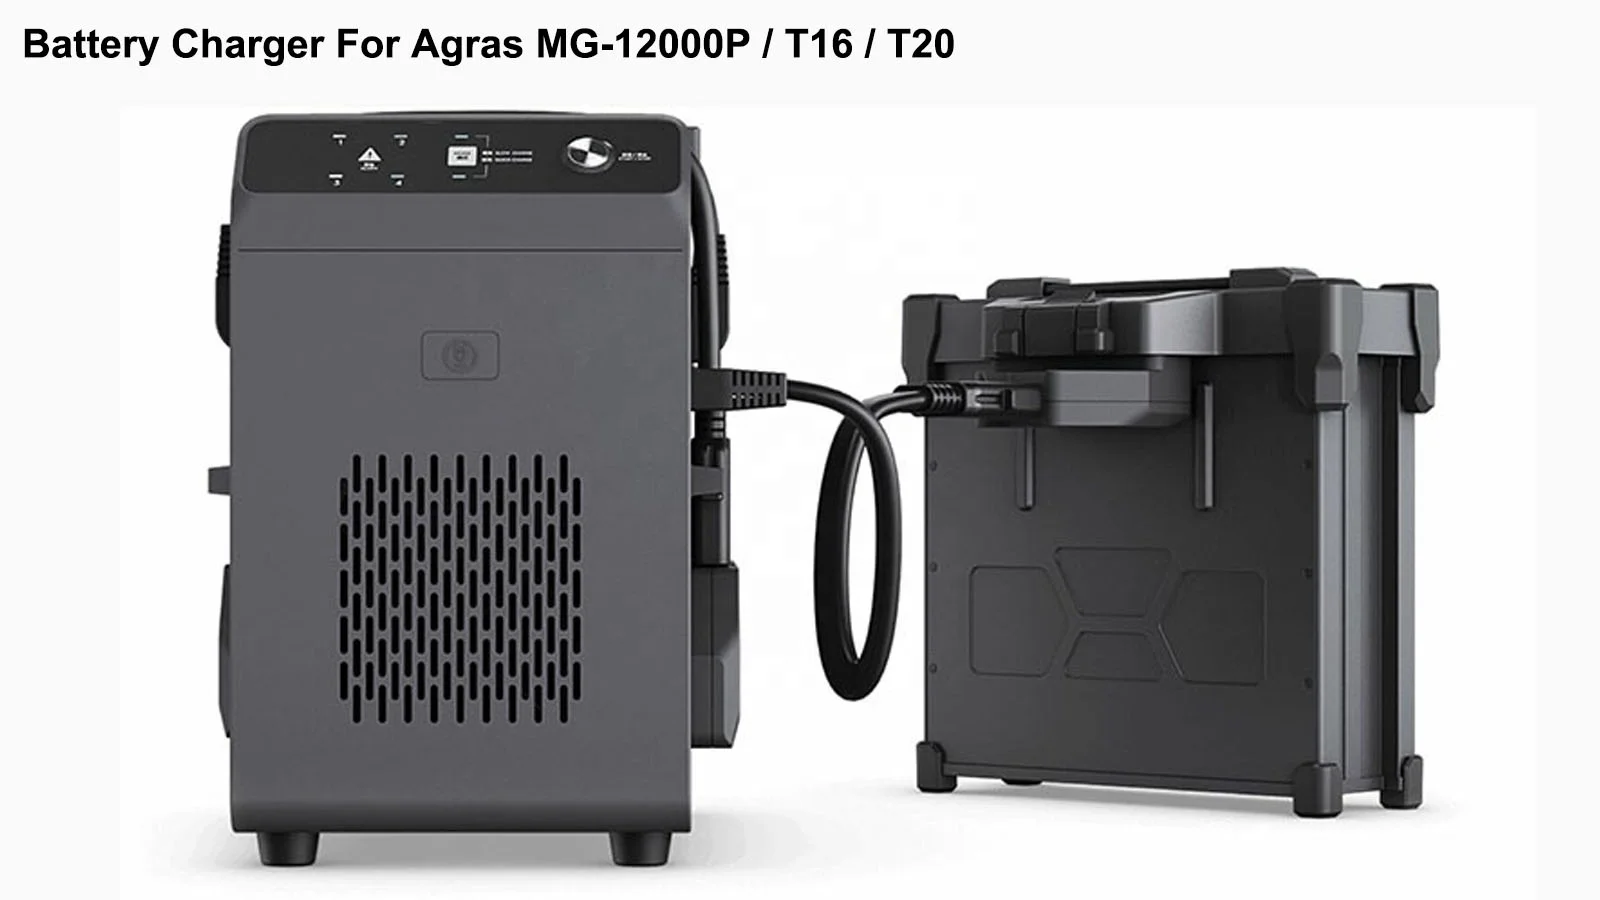 Original Agras T16 T20 Agriculture Drone Sprayer 2600W 4 Channel Intelligent For Mg-1P Mg-1 Agras T16 T20 Battery Charger enlarge